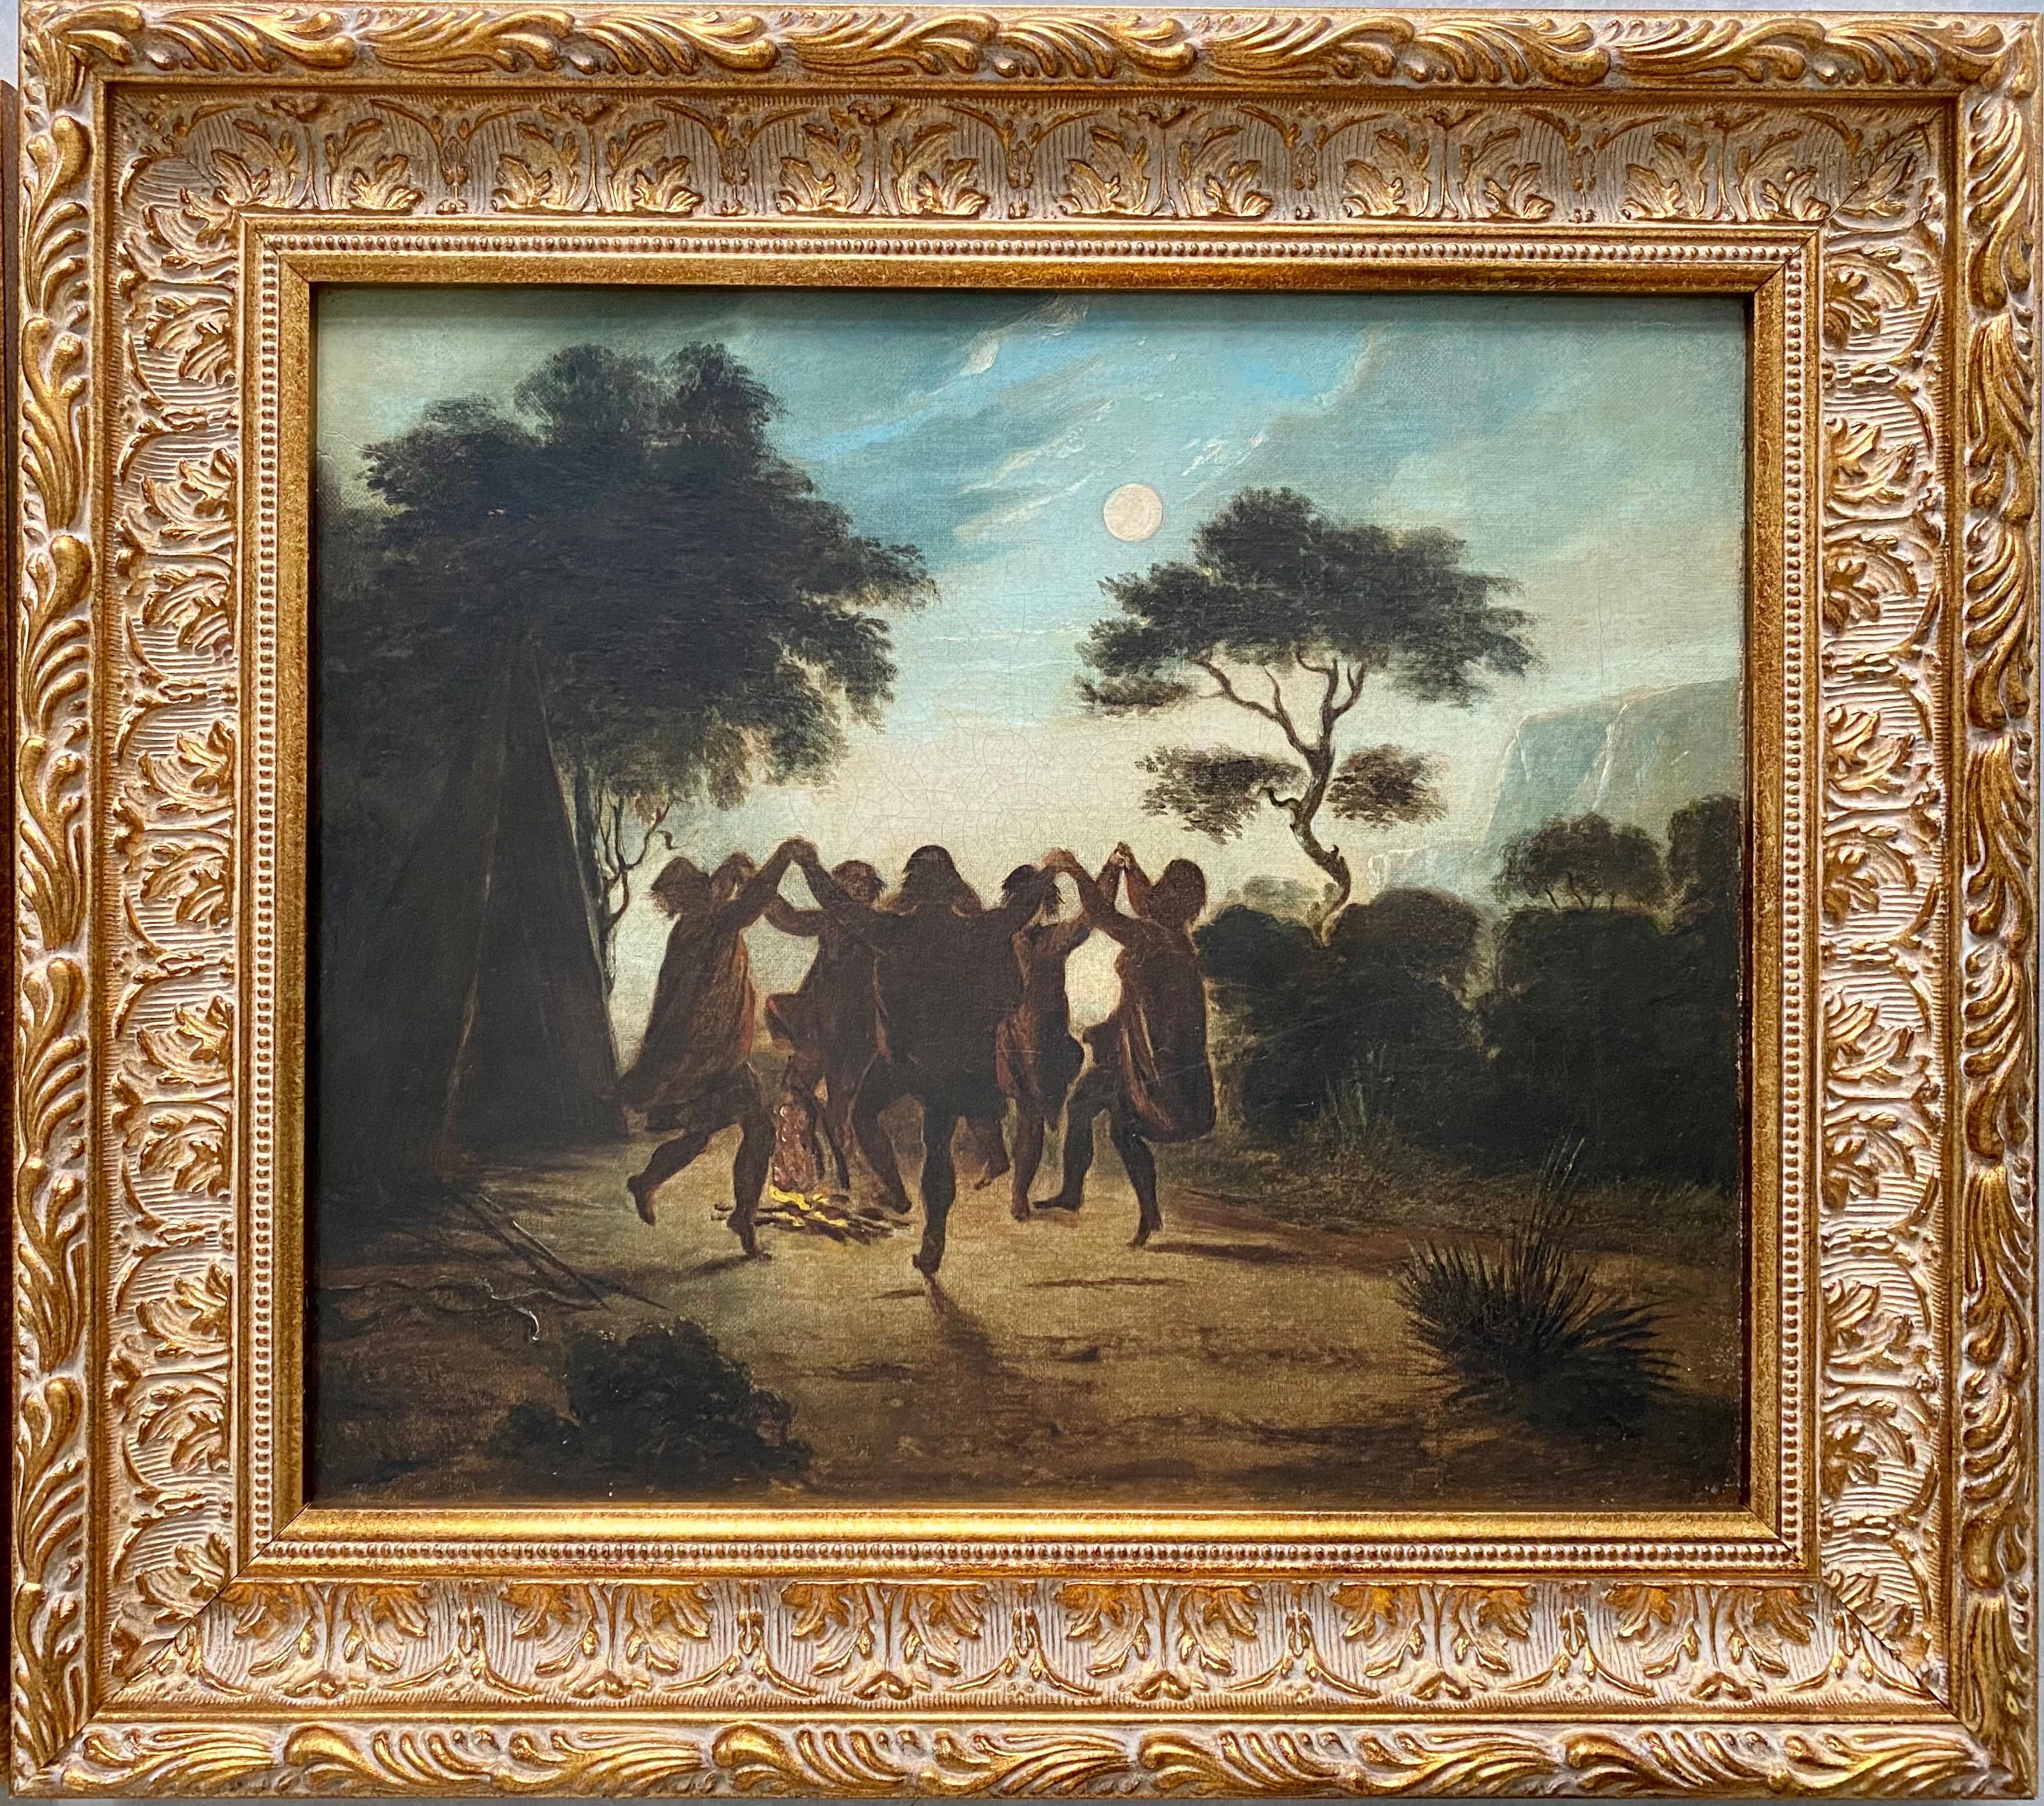 19th century painting of Native Americans - Historical Genre America Wigwam Moon